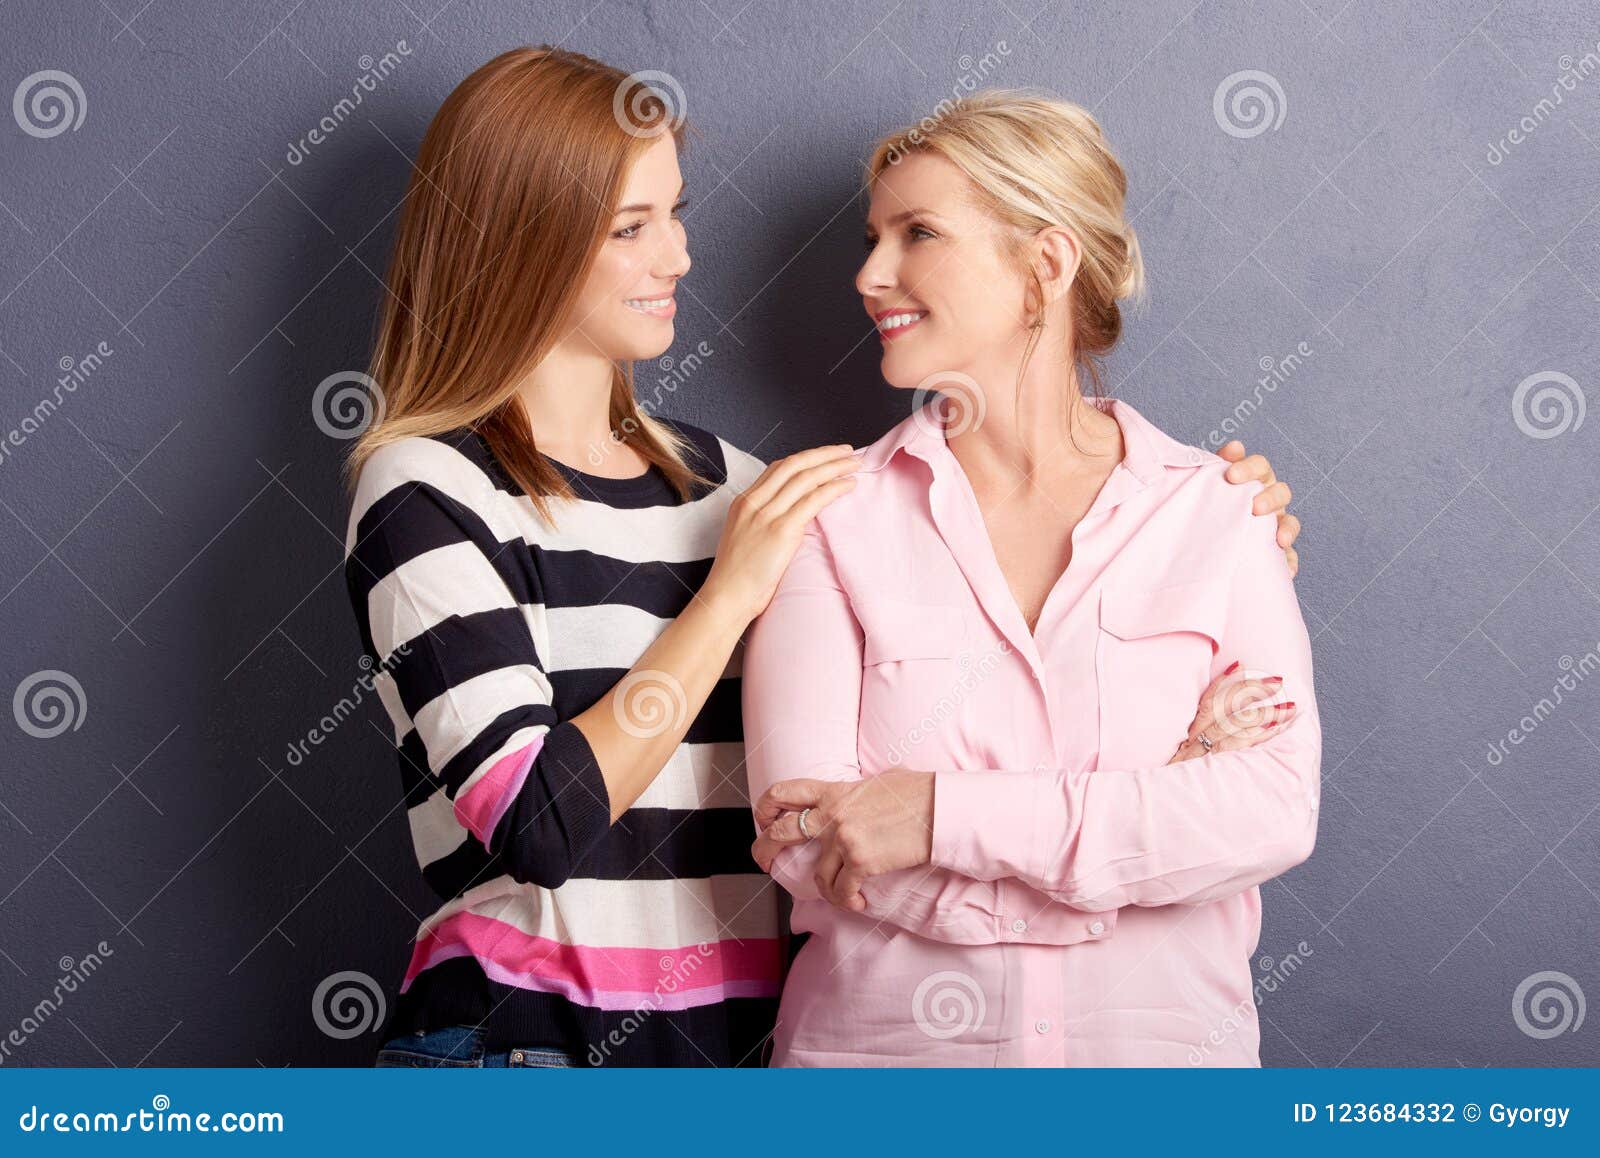 Beauty Picture Of Mother And Daughter In Studio Stock Photo - Getty Images